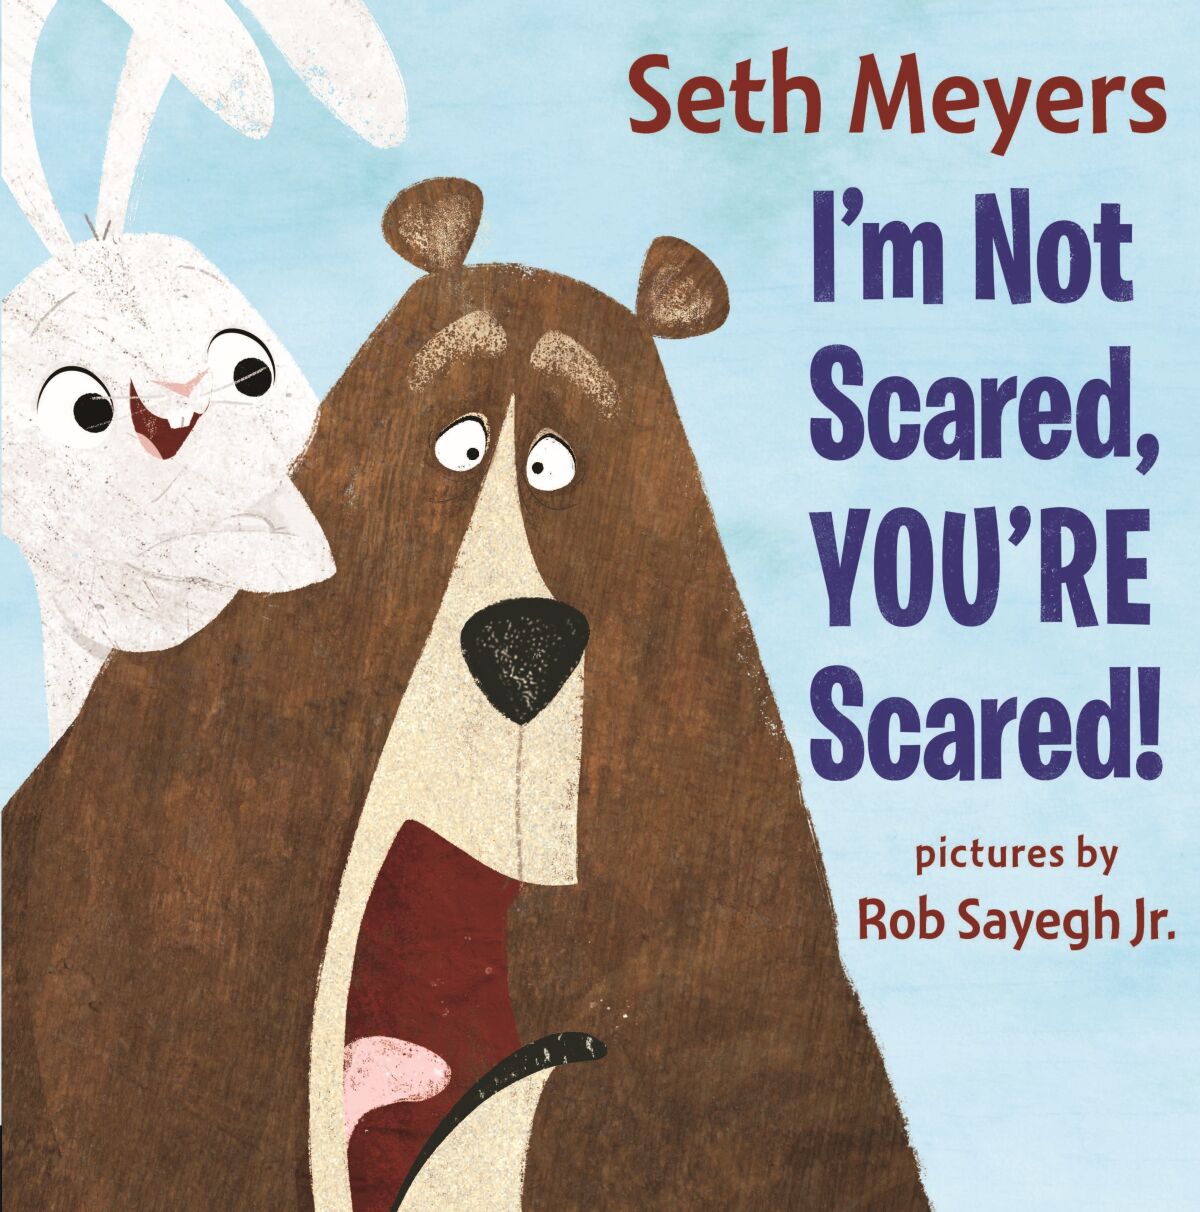 This image provided by Penguin Random House, shows the cover of the childen's book “I’m Not Scared, You’re Scared!”, by Seth Meyers. (Penguin Random House via AP)